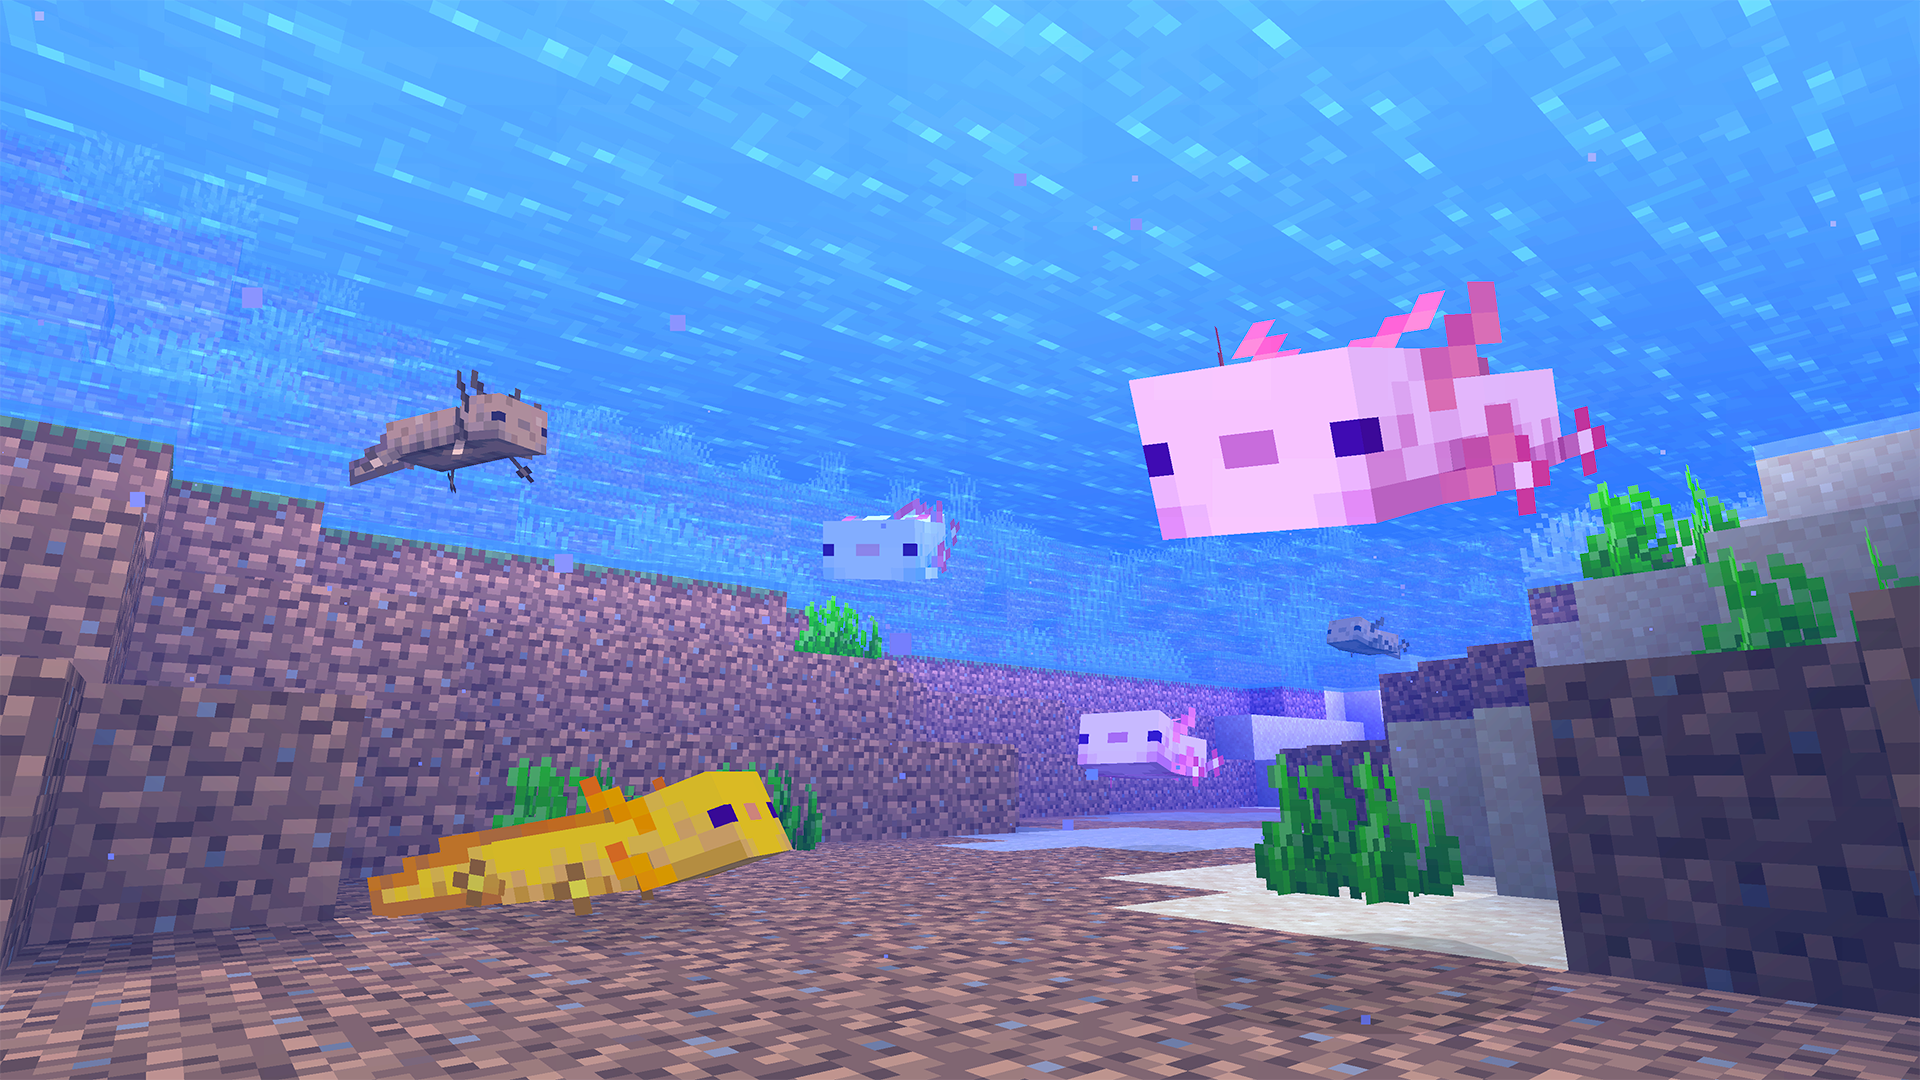 Underwater Minecraft scene with various fish and a swimming pig